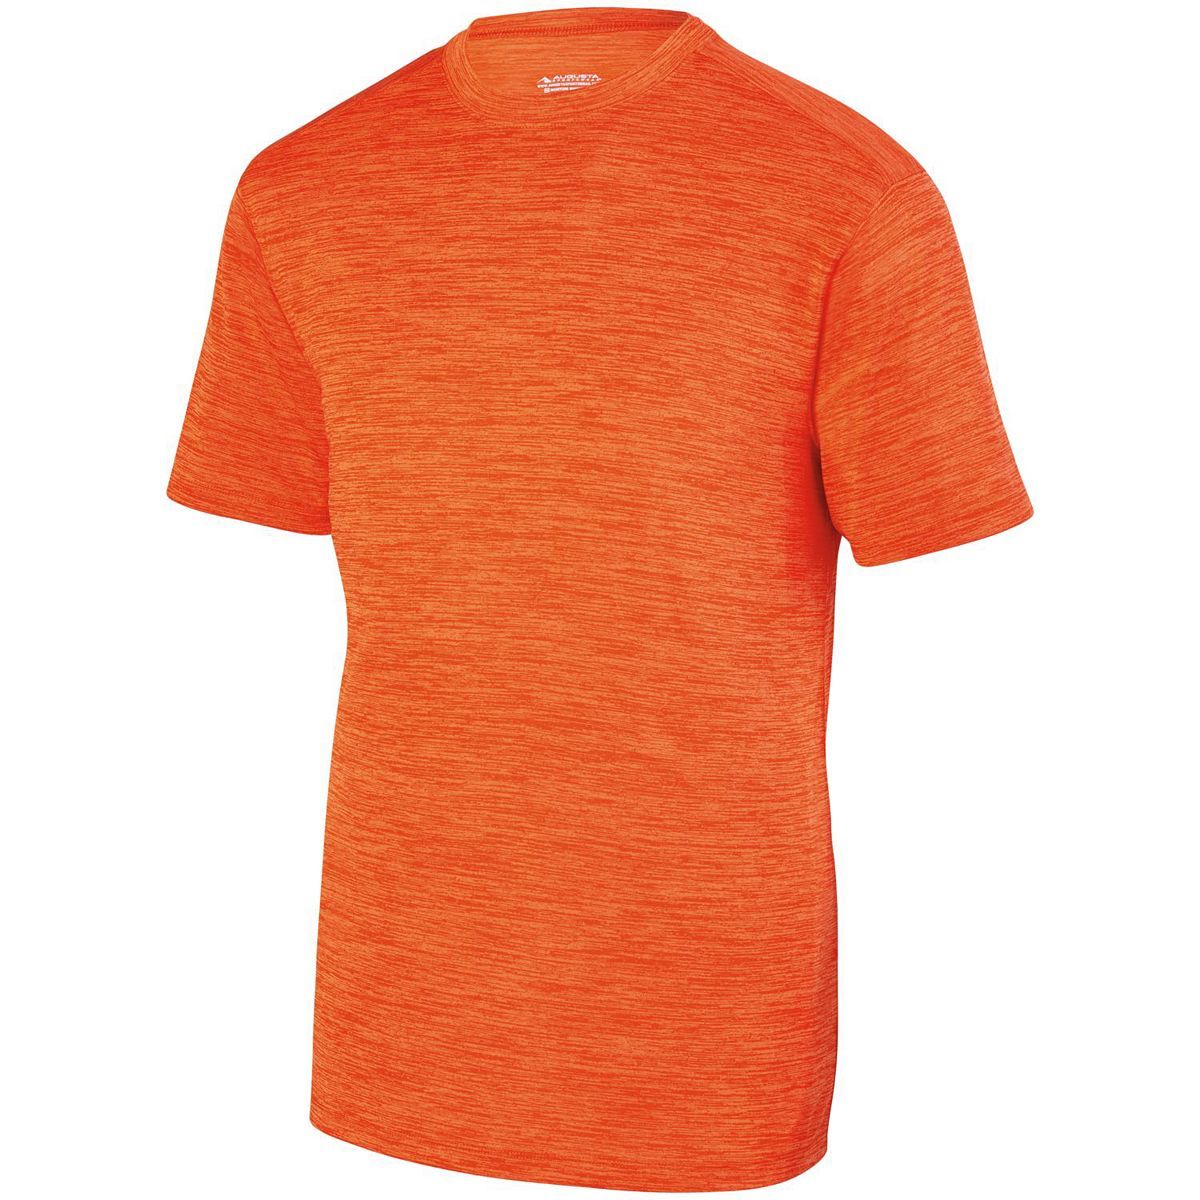 Augusta Sportswear Shadow Tonal Heather Training Tee in Orange  -Part of the Adult, Adult-Tee-Shirt, T-Shirts, Augusta-Products, Shirts, Tonal-Fleece-Collection product lines at KanaleyCreations.com